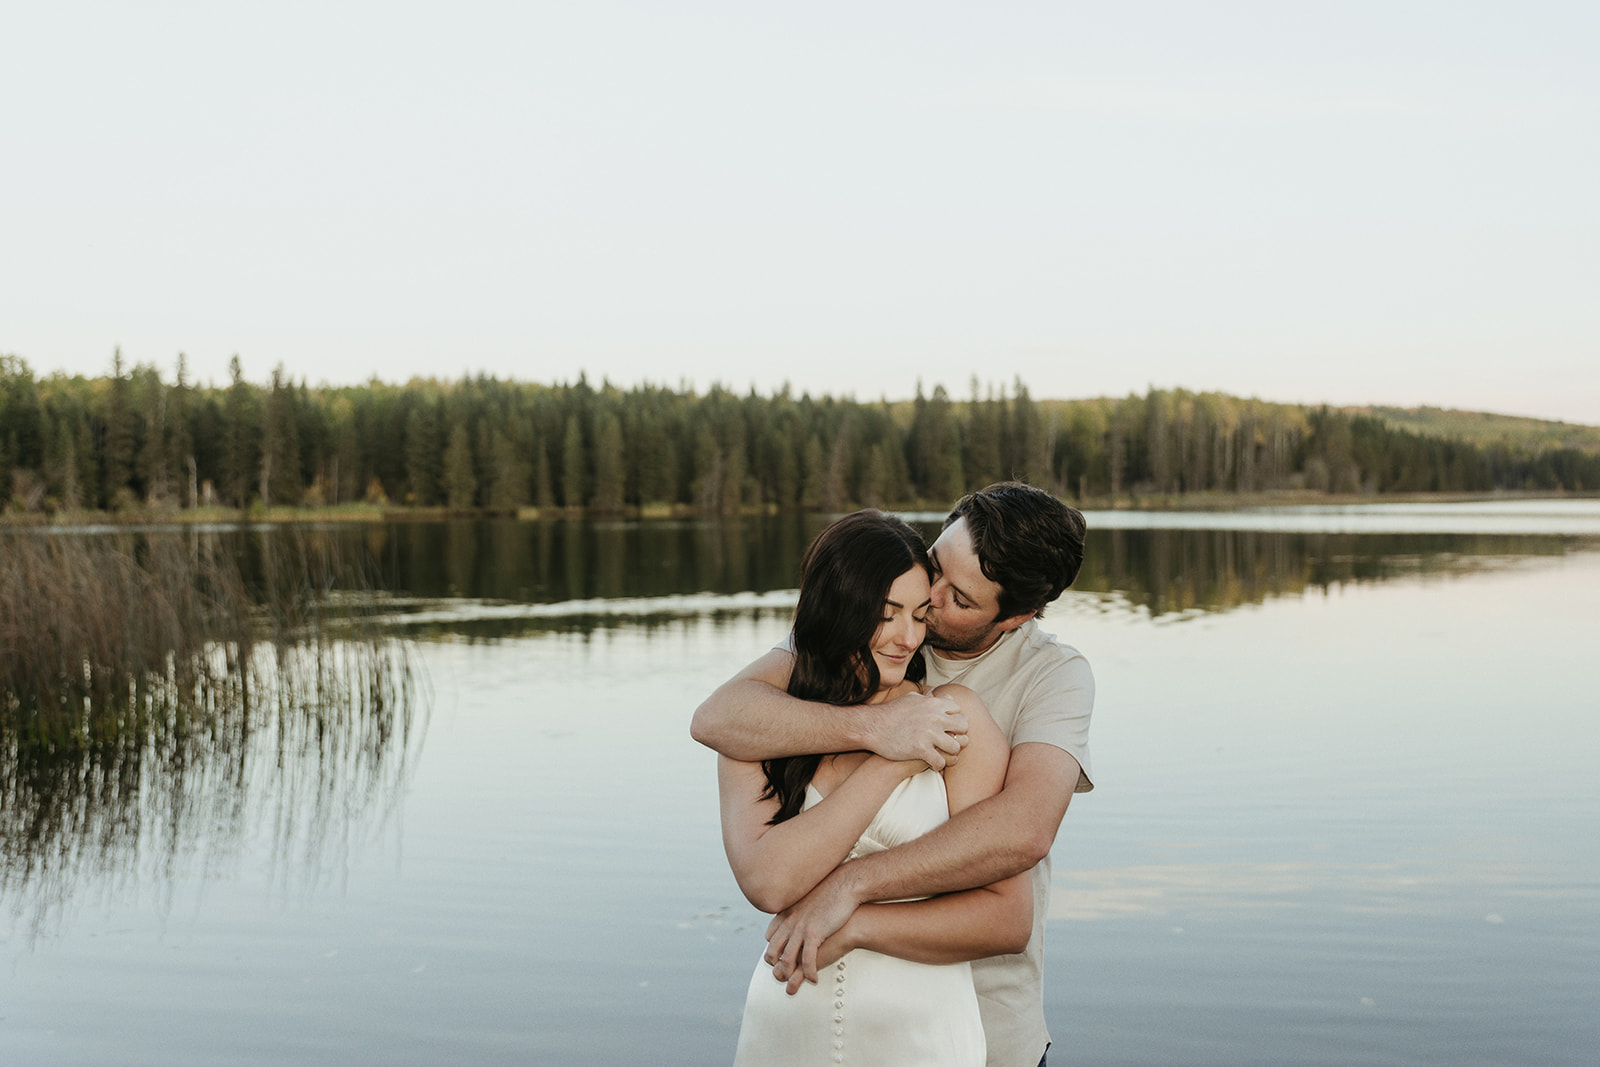 couple embraces each other on the edge of the lake during blue hour for their engagement photos